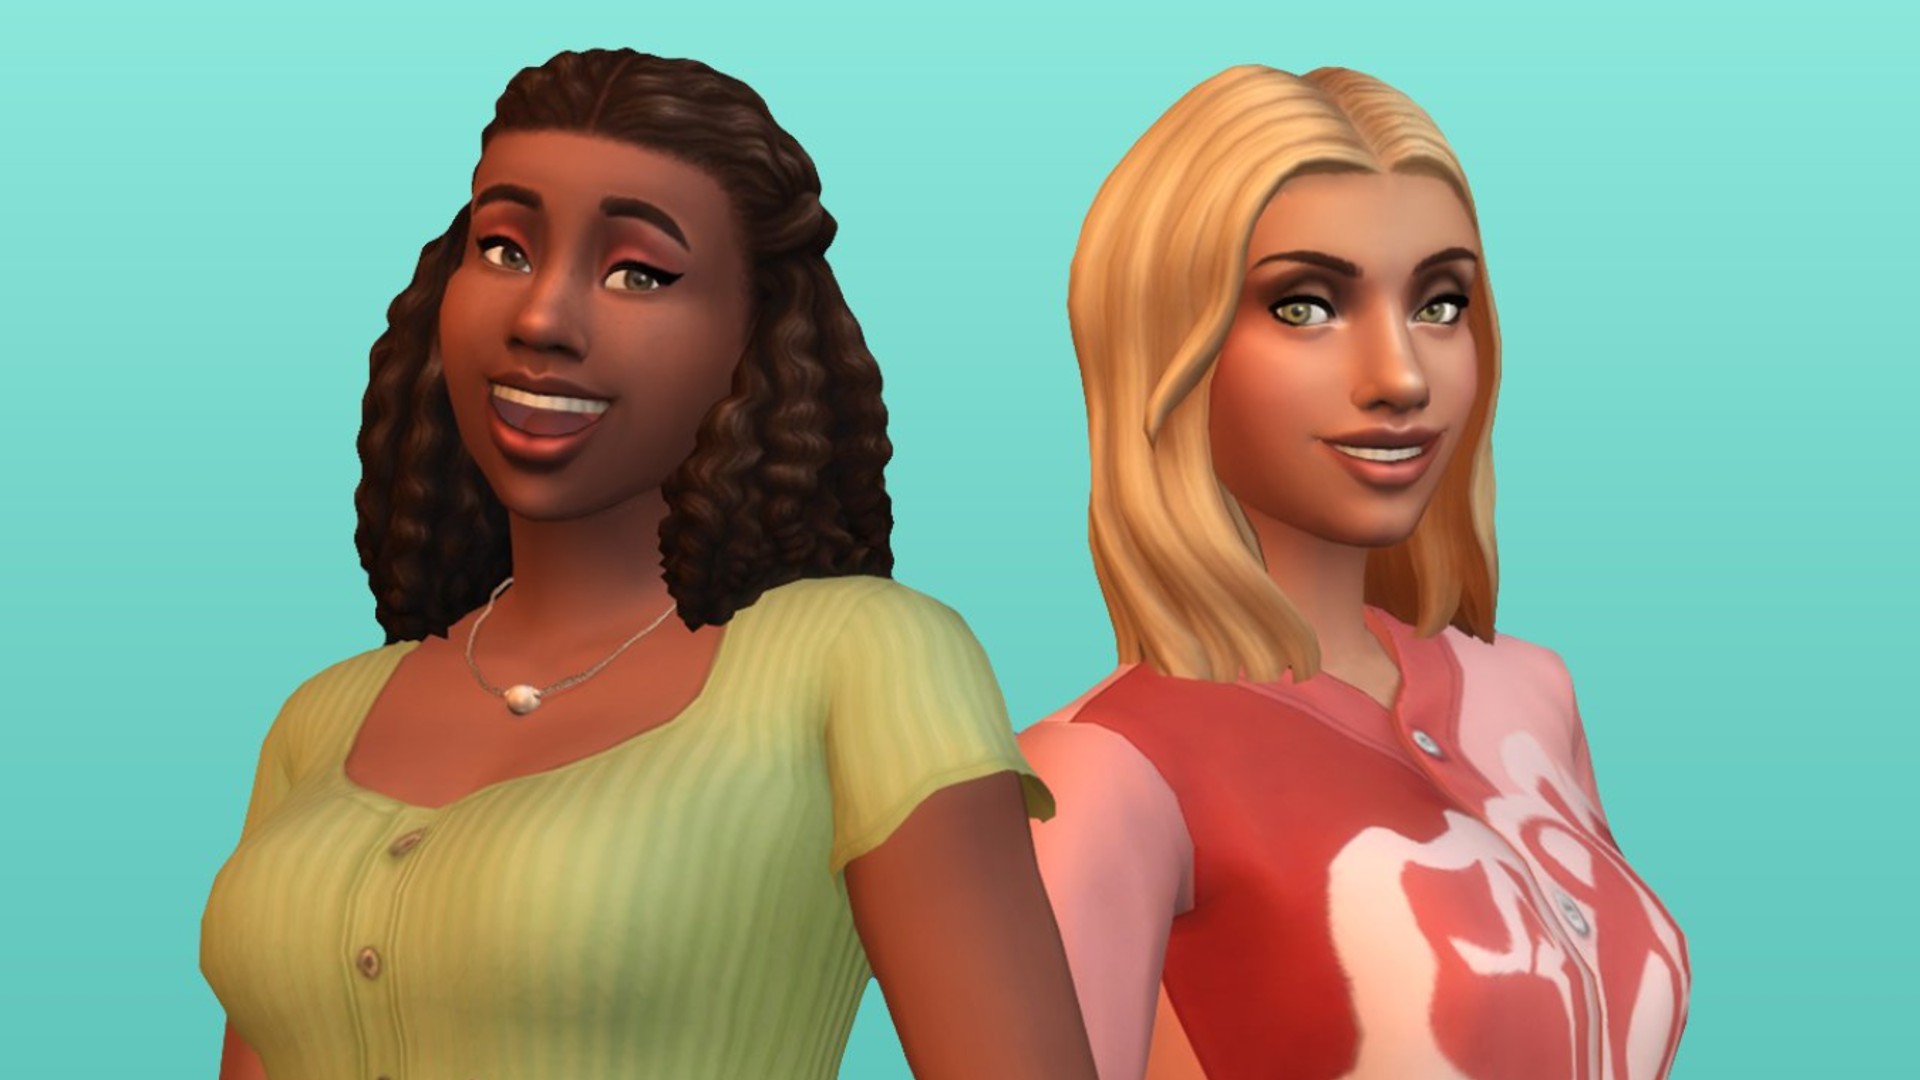 Sims 5 release date speculation and wishlist